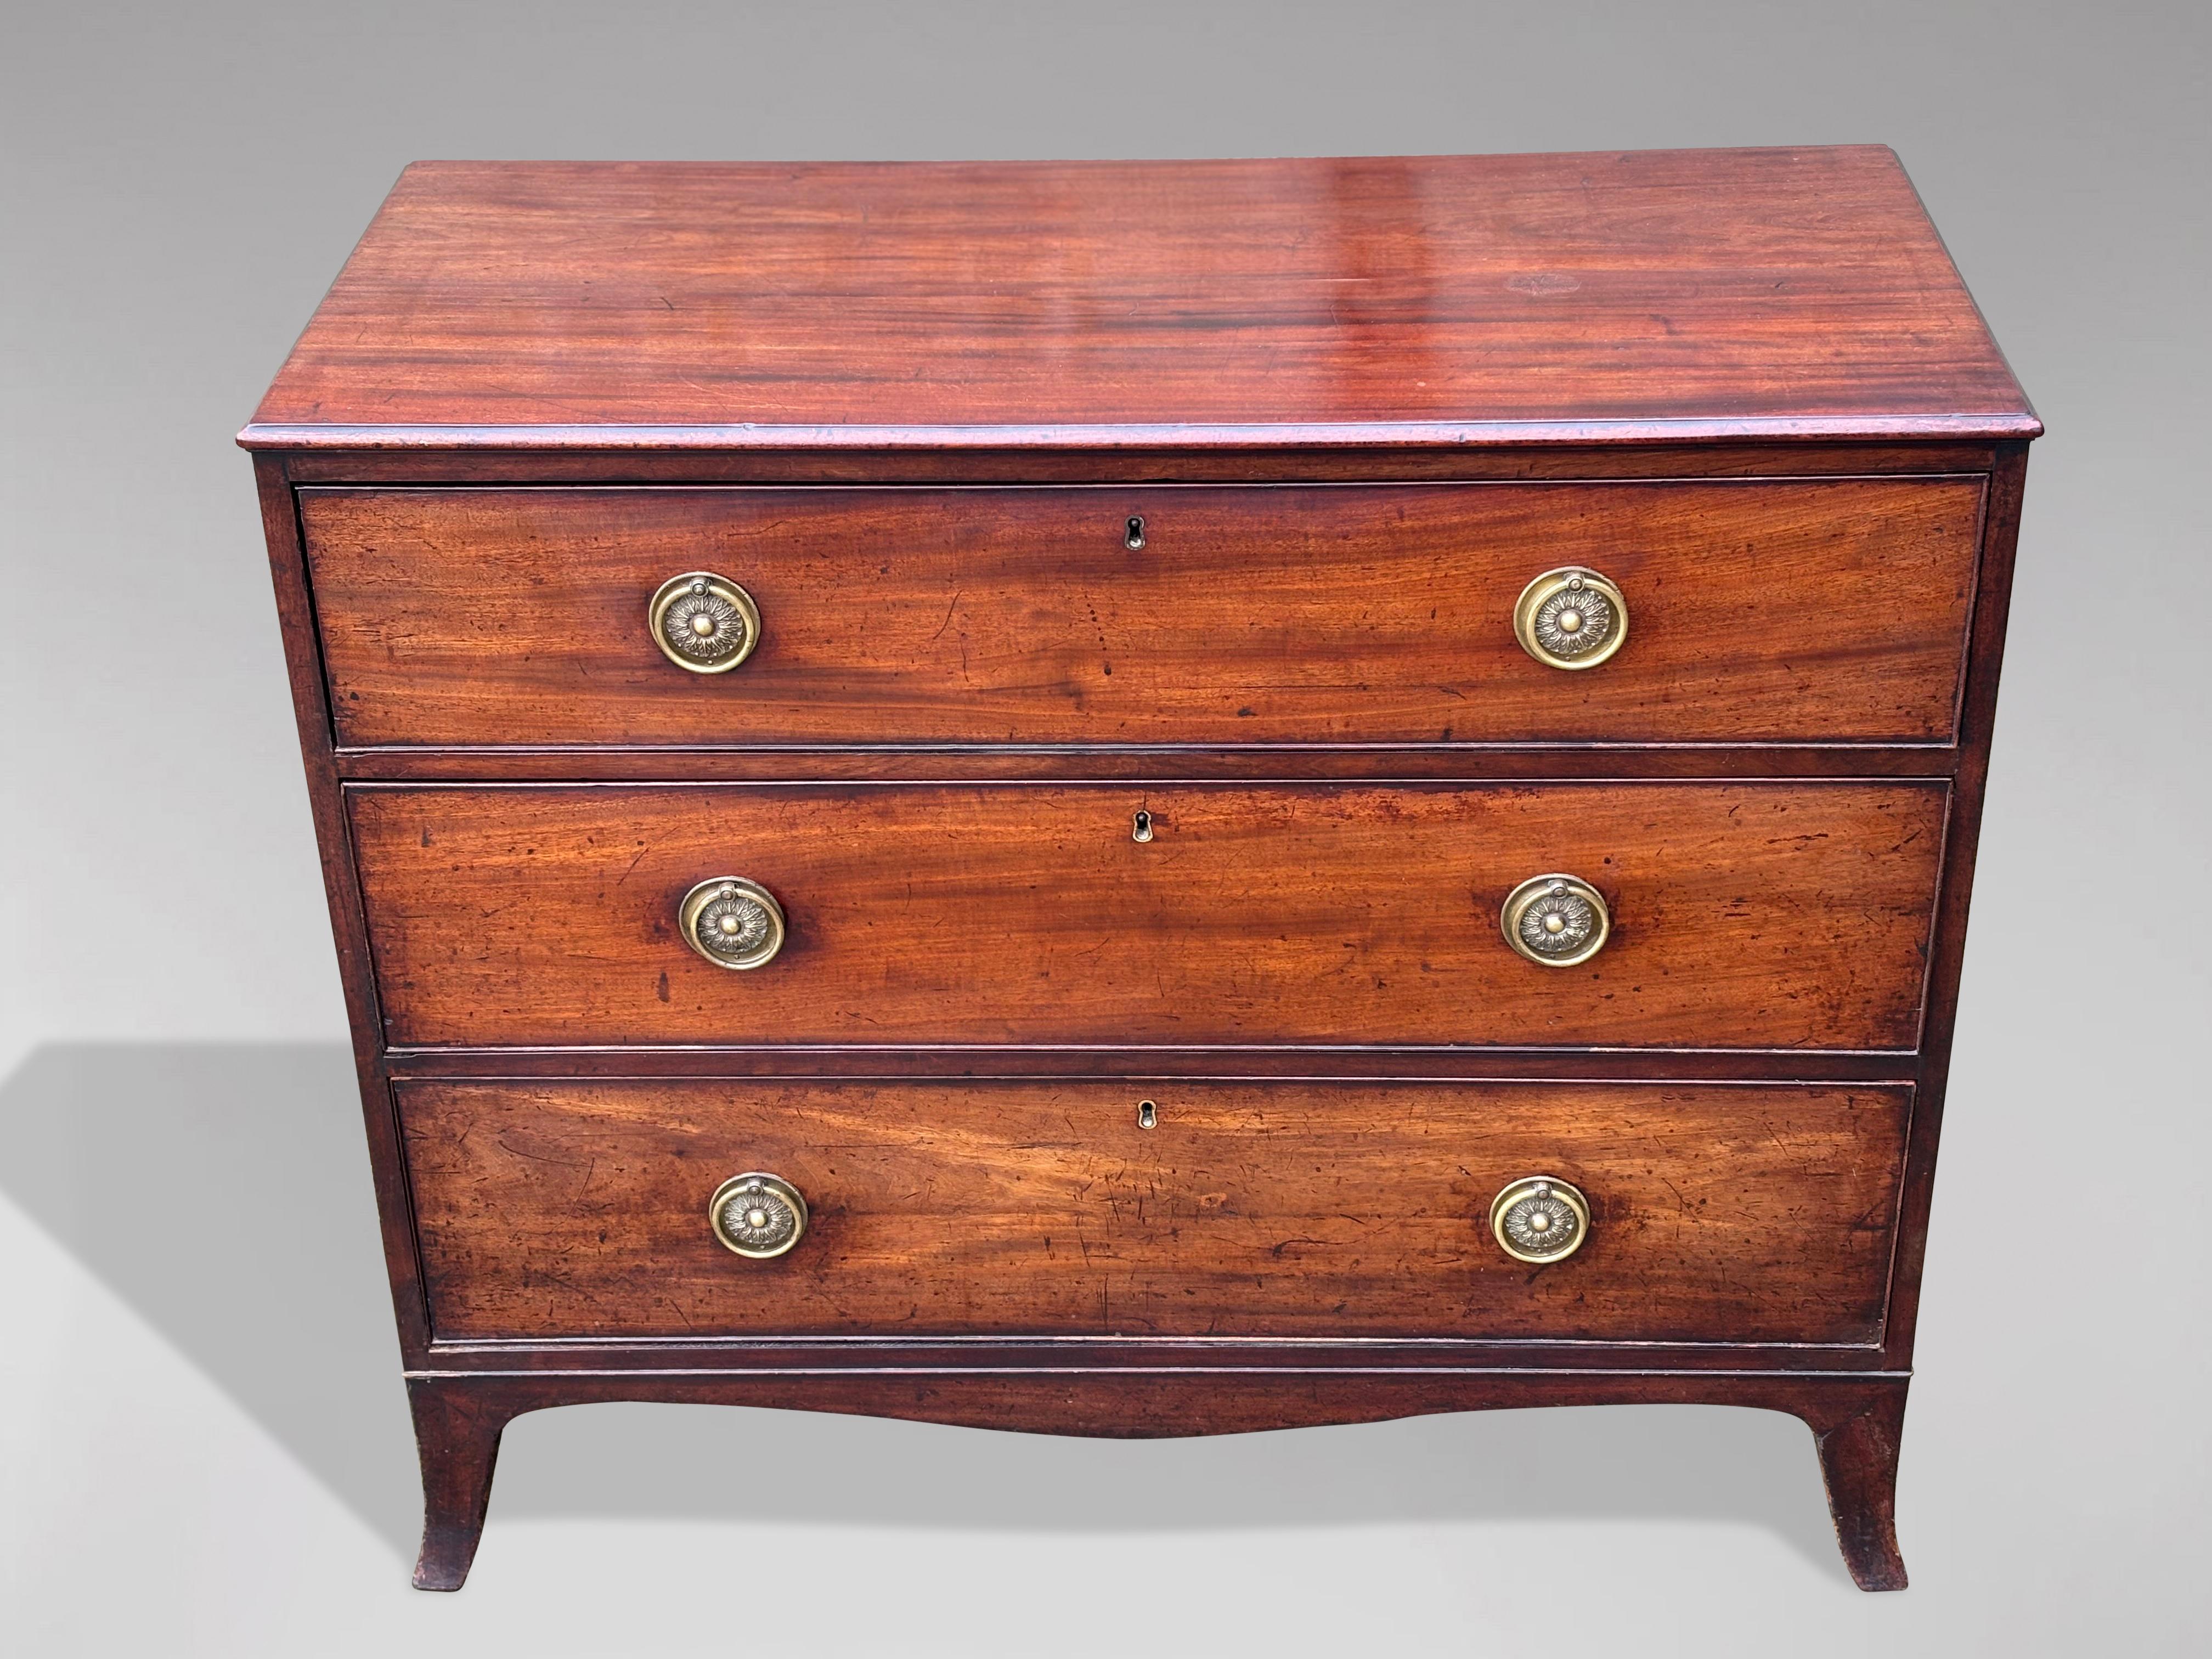 British 18th Century George III Period Mahogany Chest of Drawers For Sale